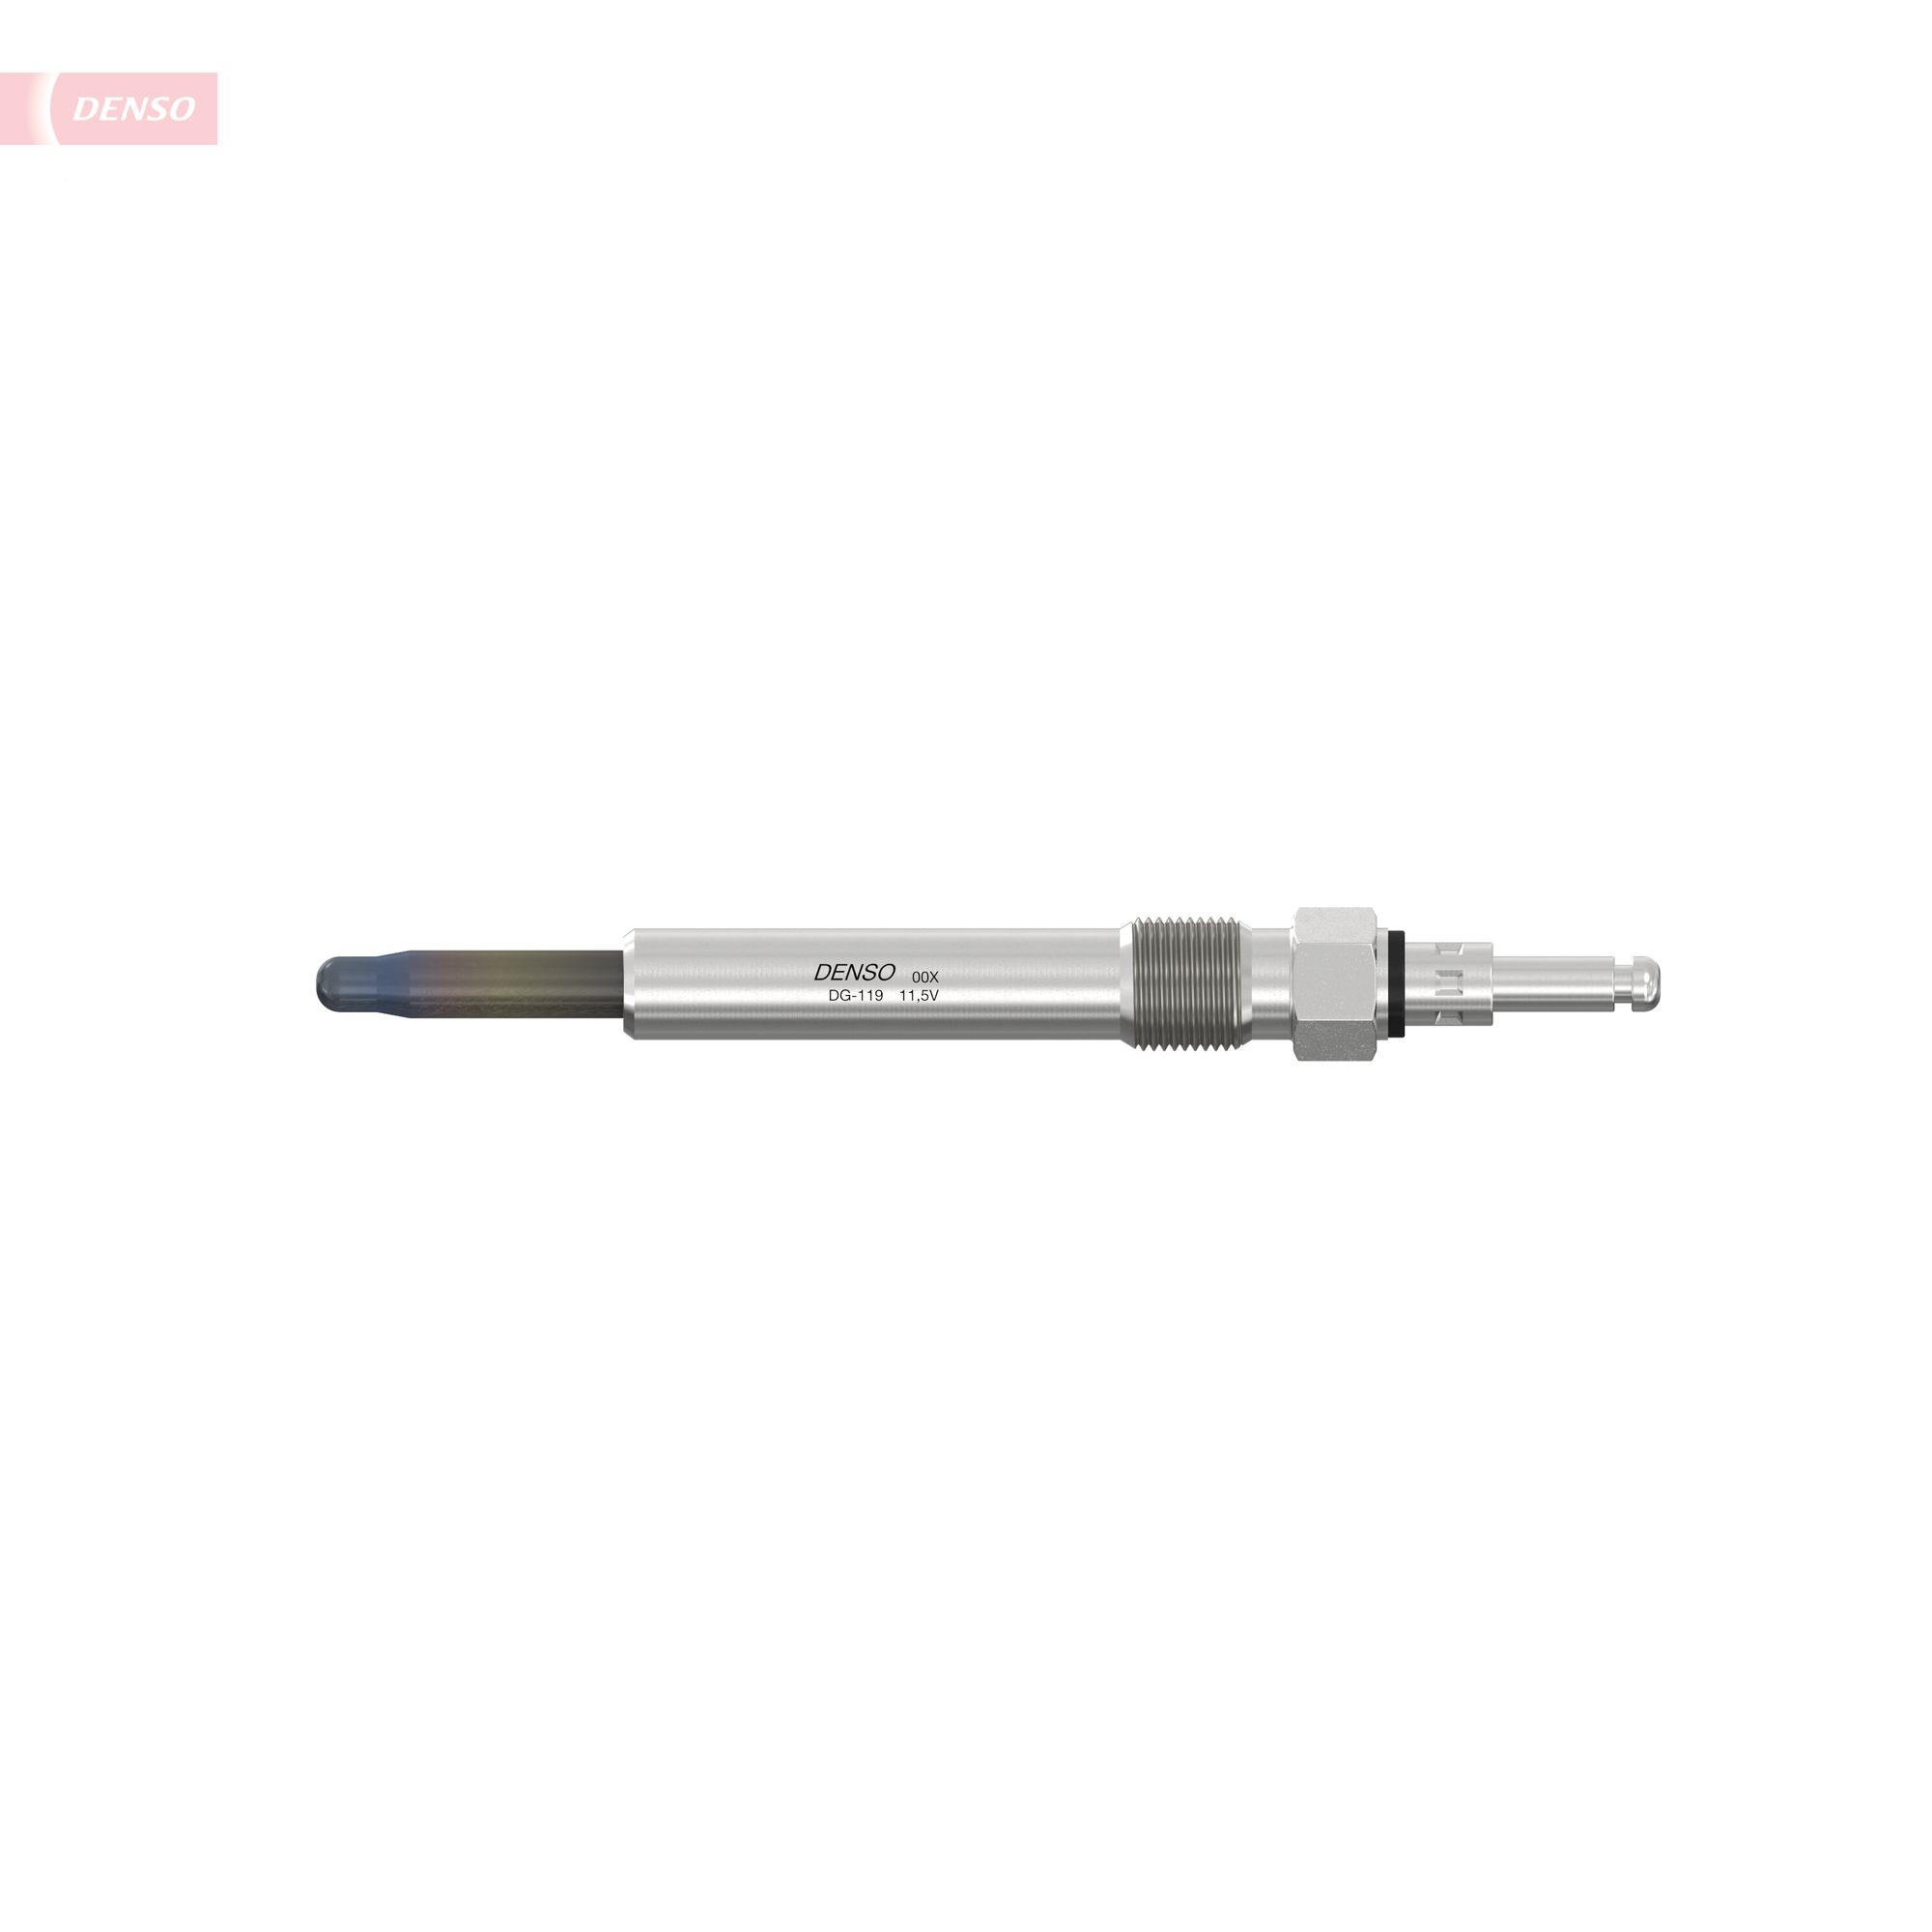 DENSO DG-119 Glow plug MERCEDES-BENZ experience and price